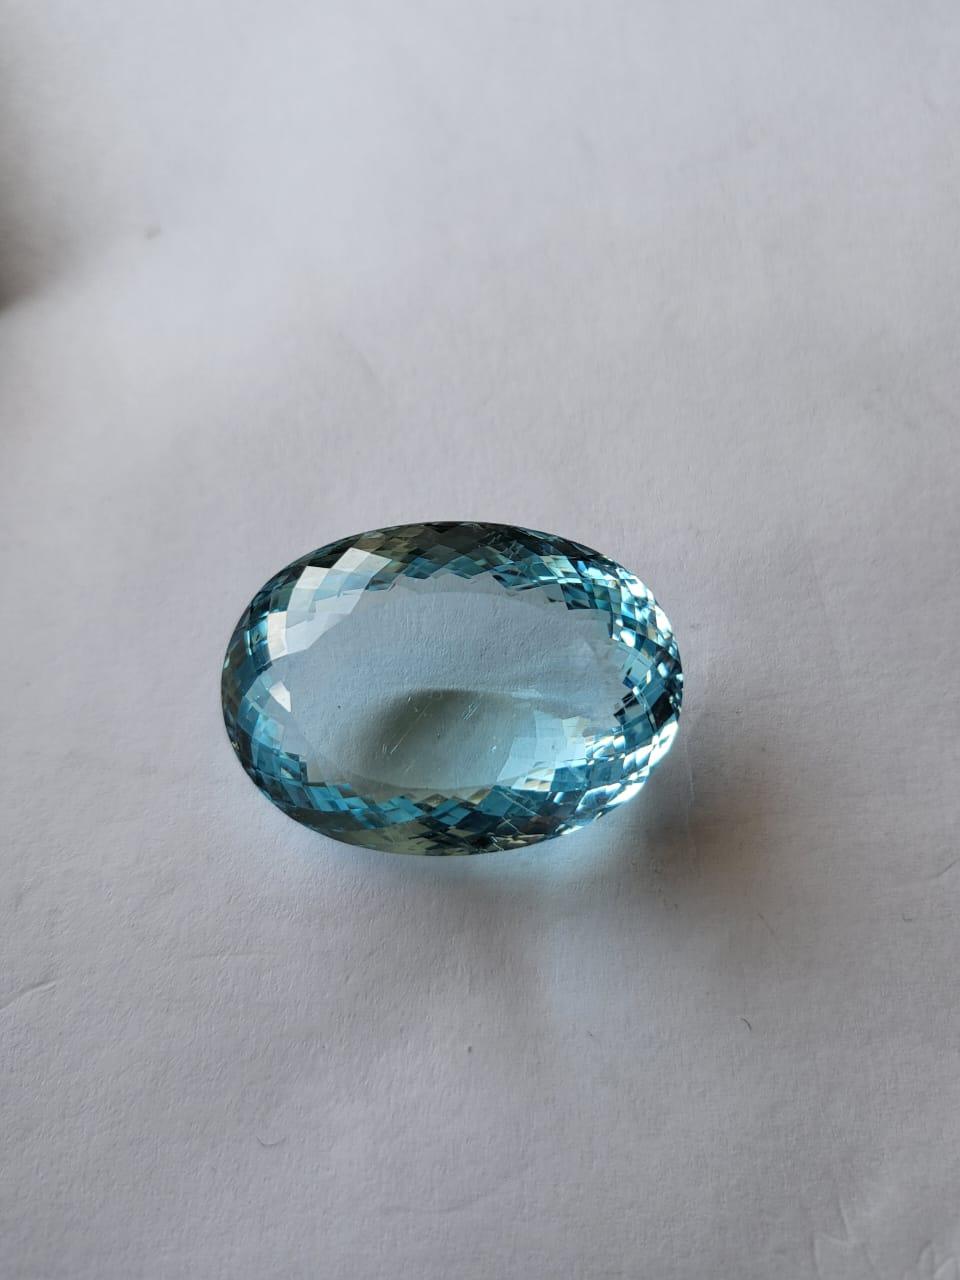 Natural Beautiful Aquamarine Gemstone.
58.83 Carat with a elegant blue color and excellent clarity. Also has an excellent fancy Oval cut with ideal polish to show great shine and color . It will look authentic in jewellery. The dimensions of the